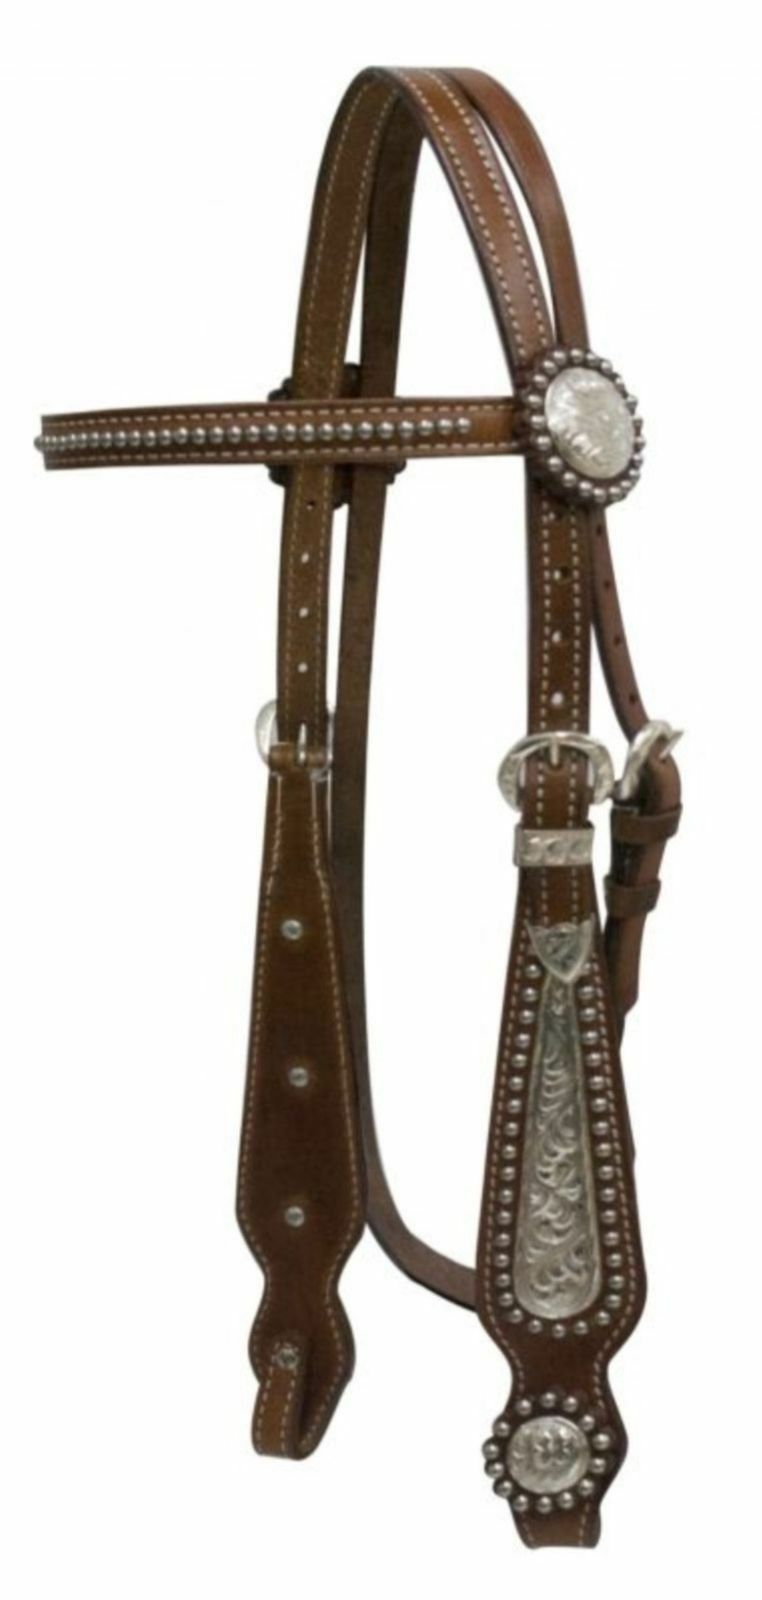 NEW HORSE TACK! Showman Engraved Silver Inlay Leather Headstall & Reins Set 